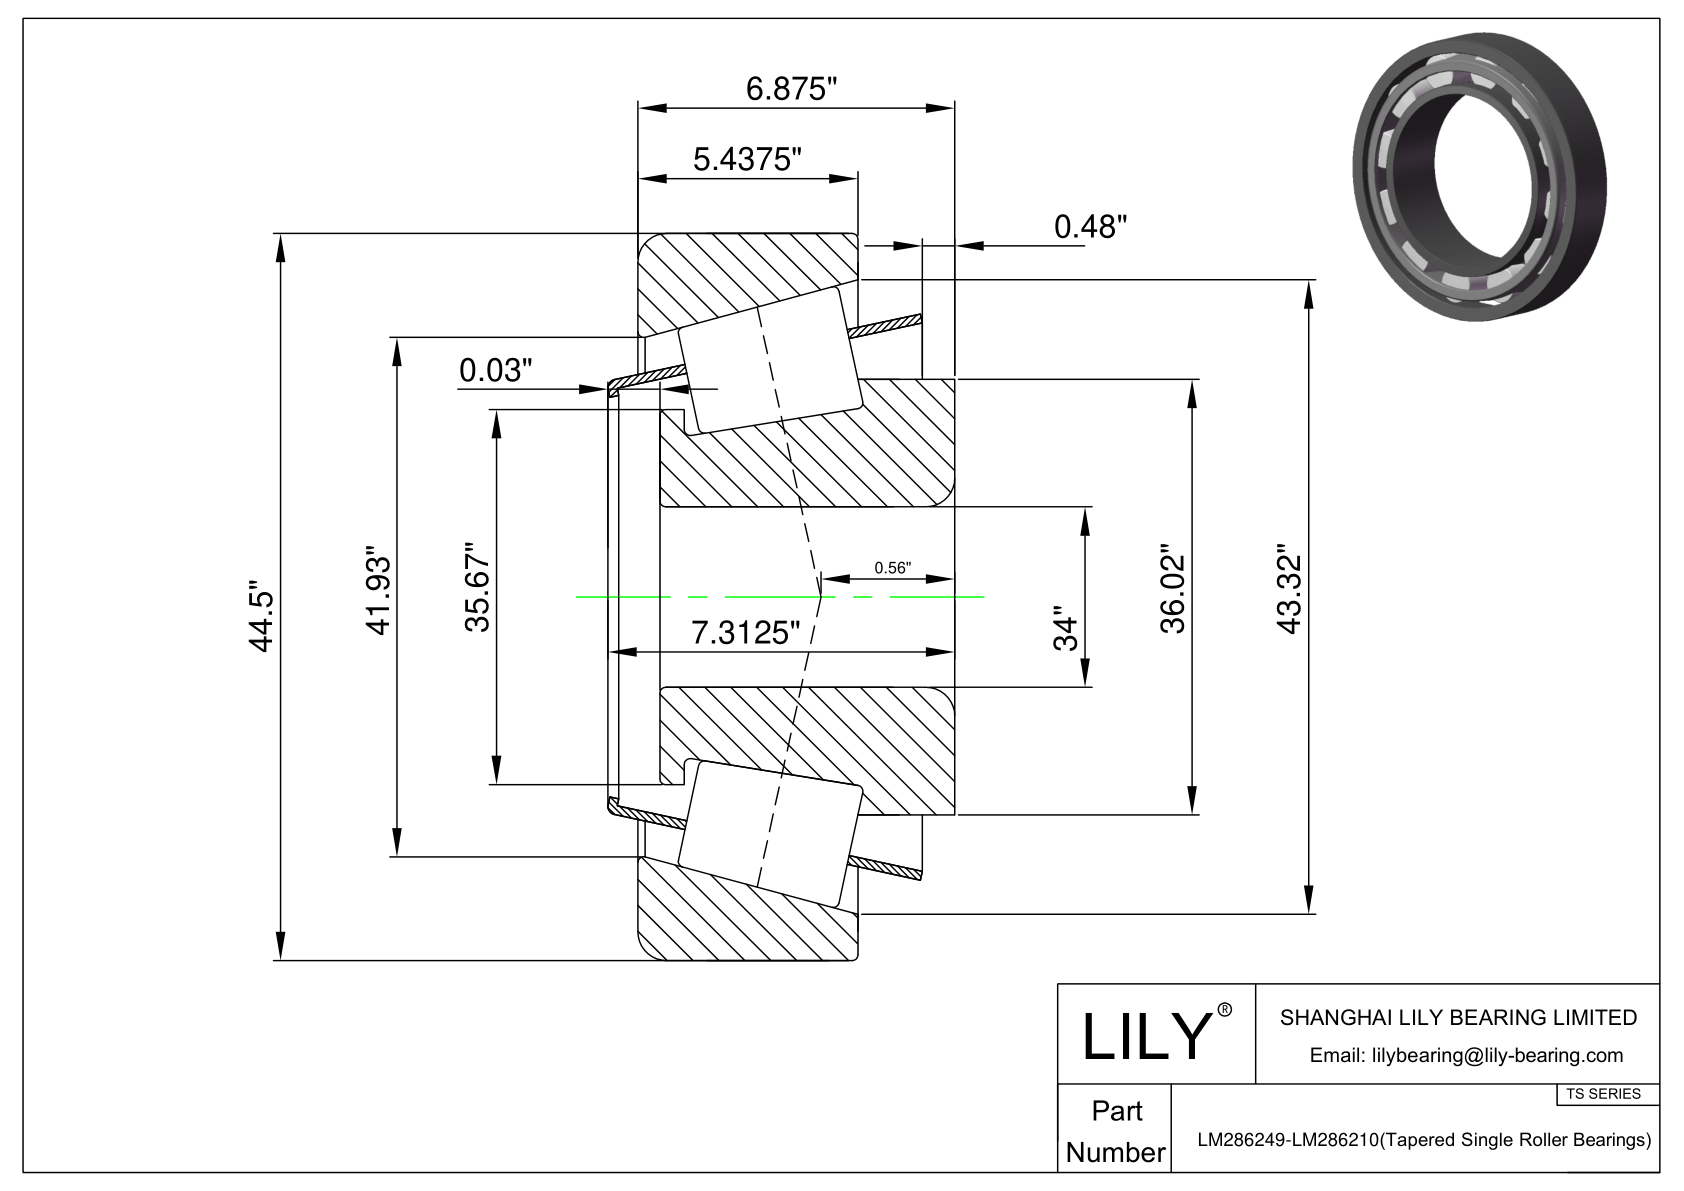 LM286249-LM286210 TS (Tapered Single Roller Bearings) (Imperial) cad drawing